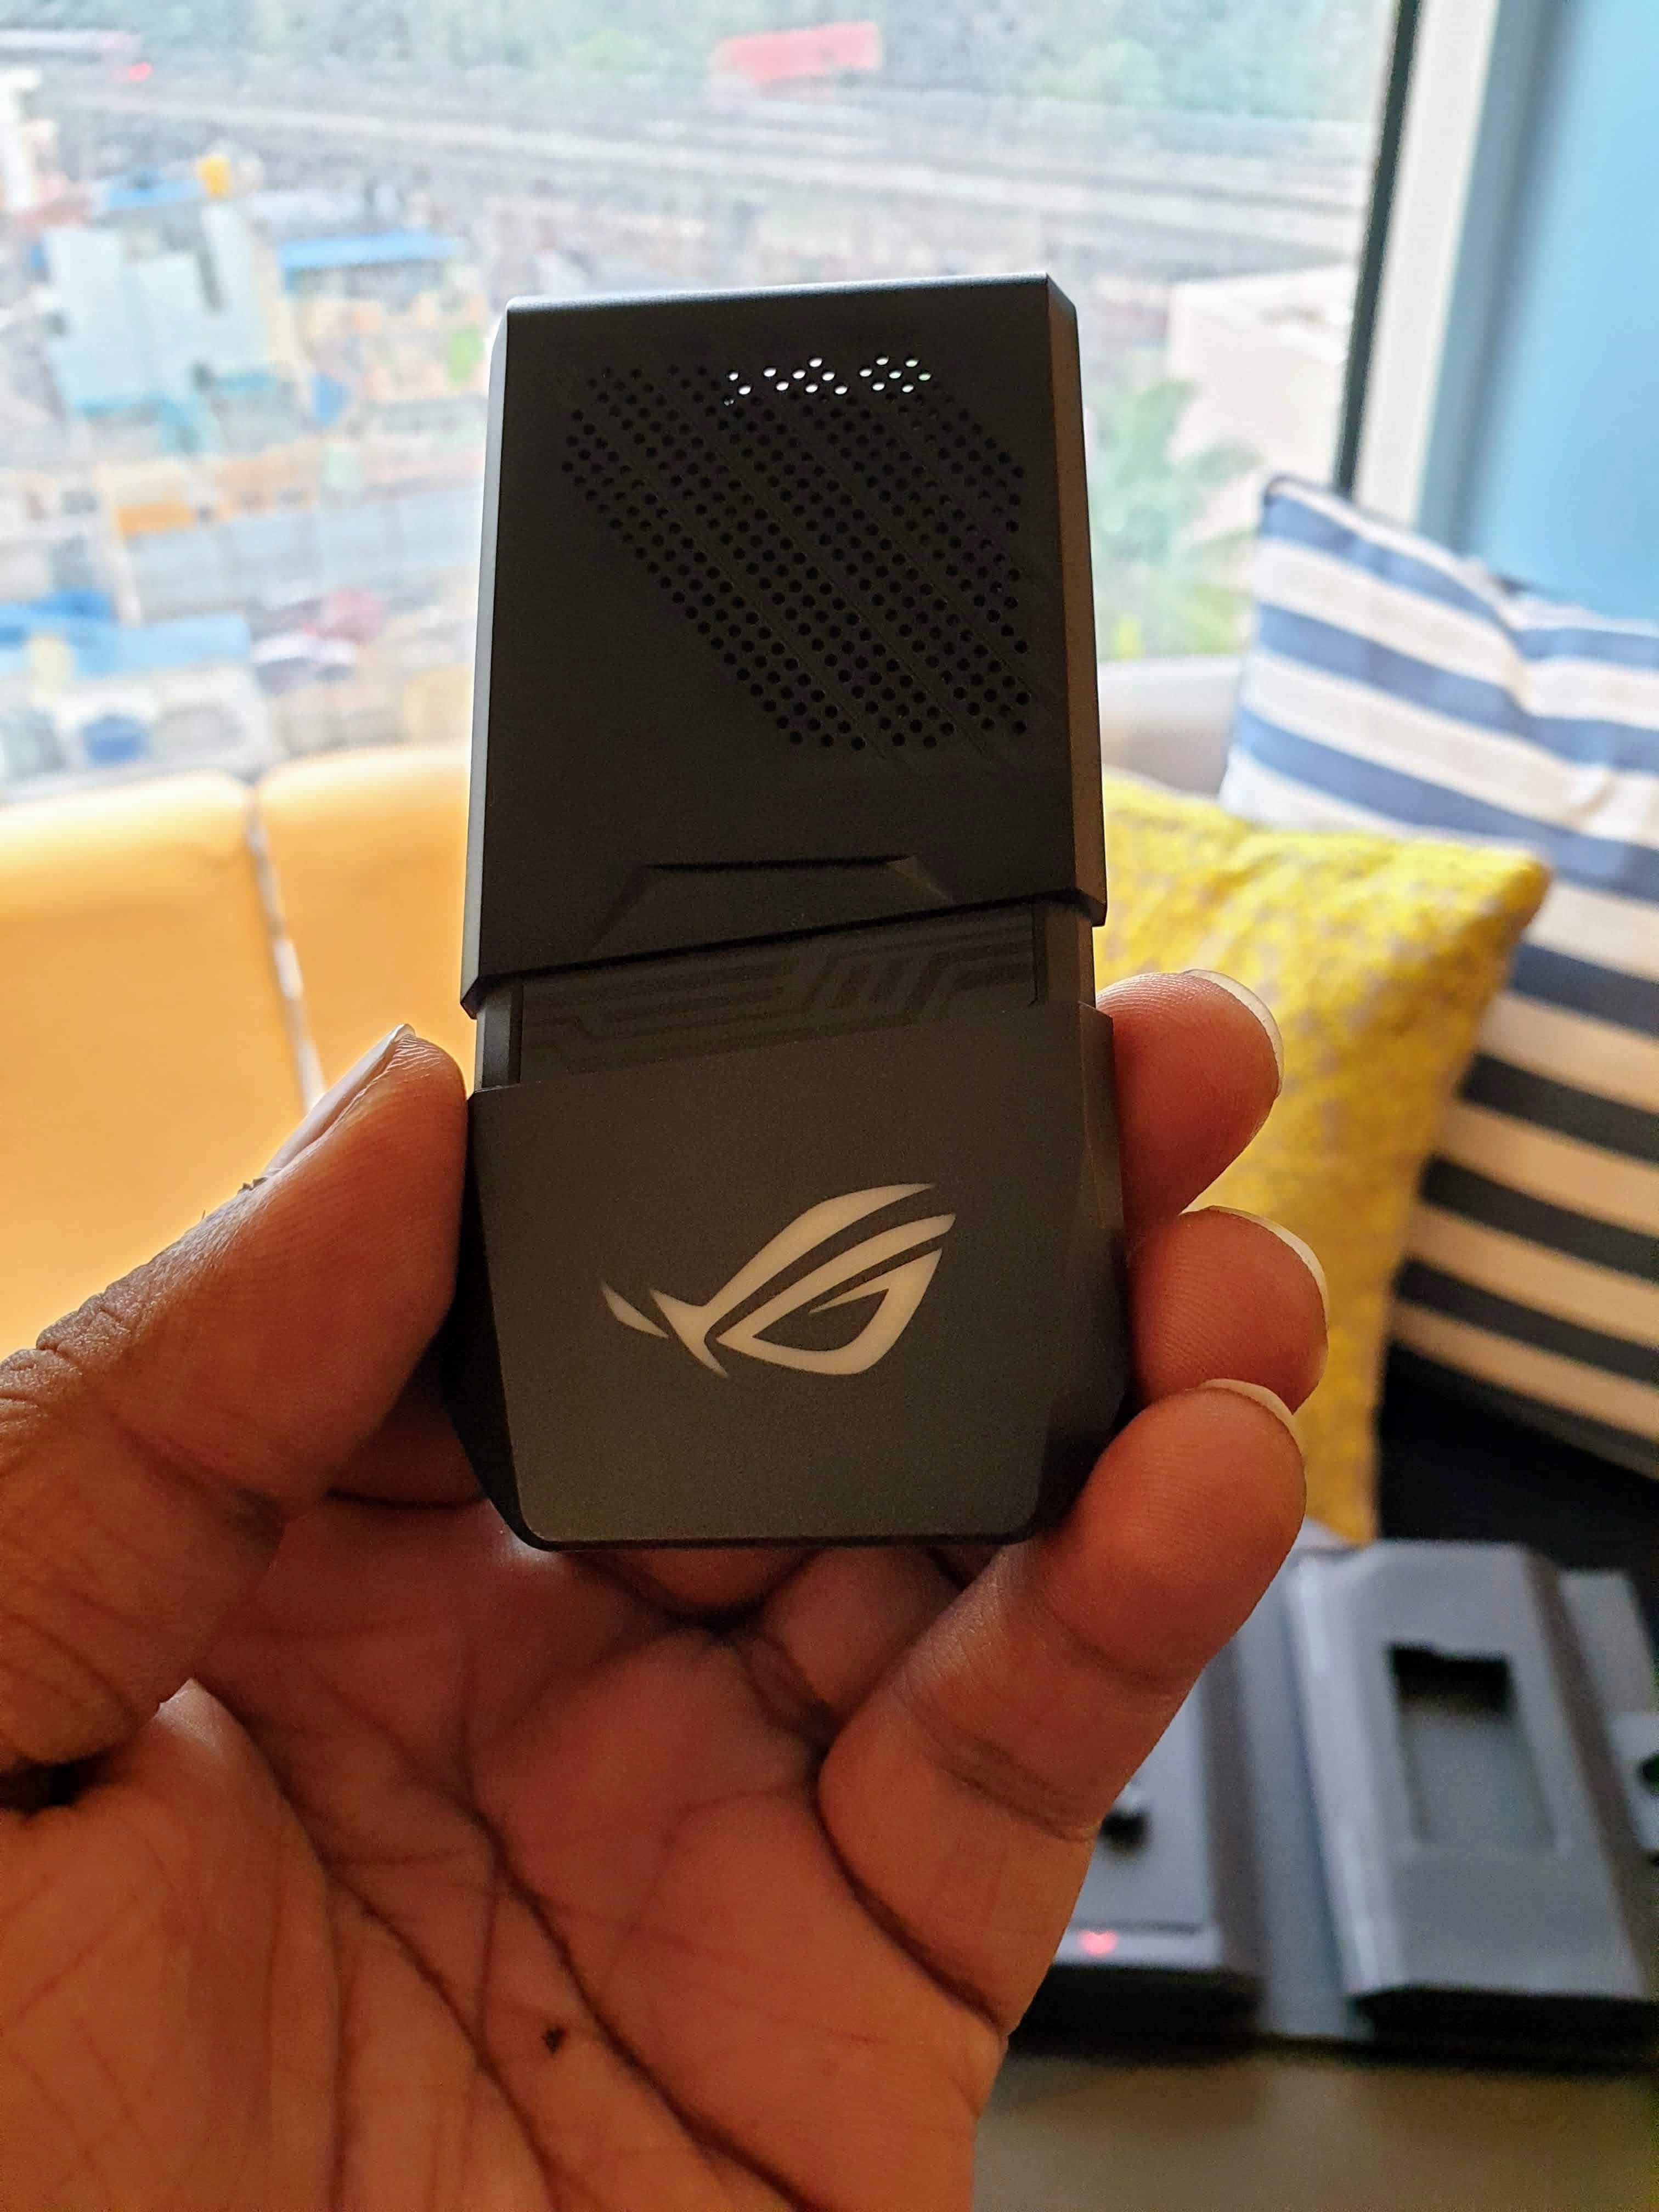 Asus ROG Phone Hands-on & First Impressions - The Real #GameChanger ? - 9